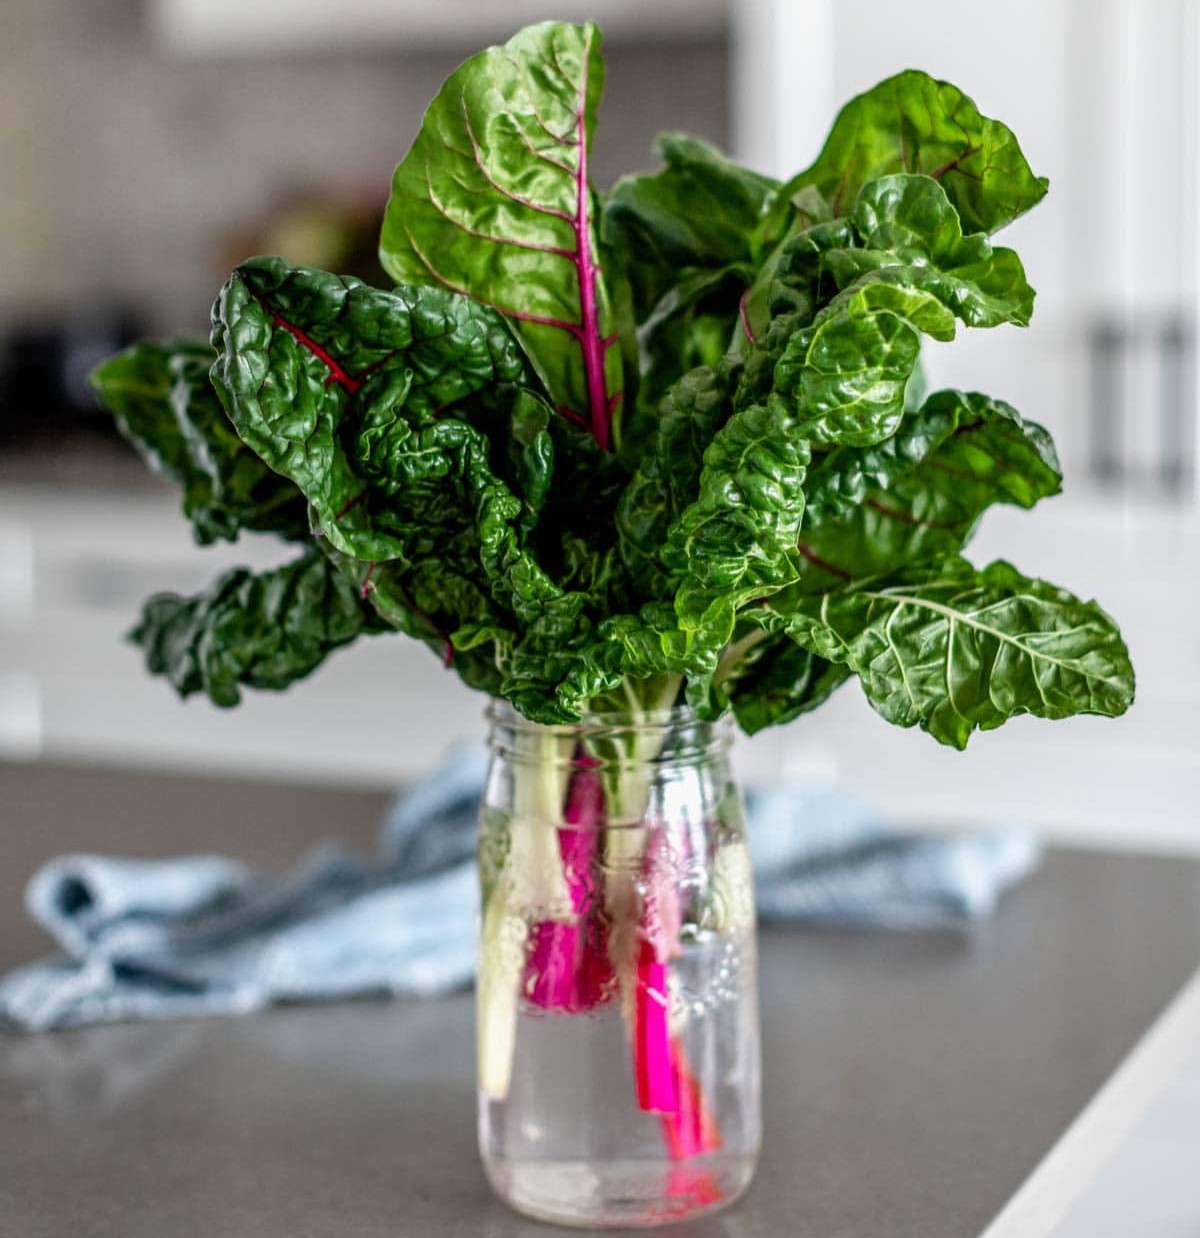 How To Store Chard